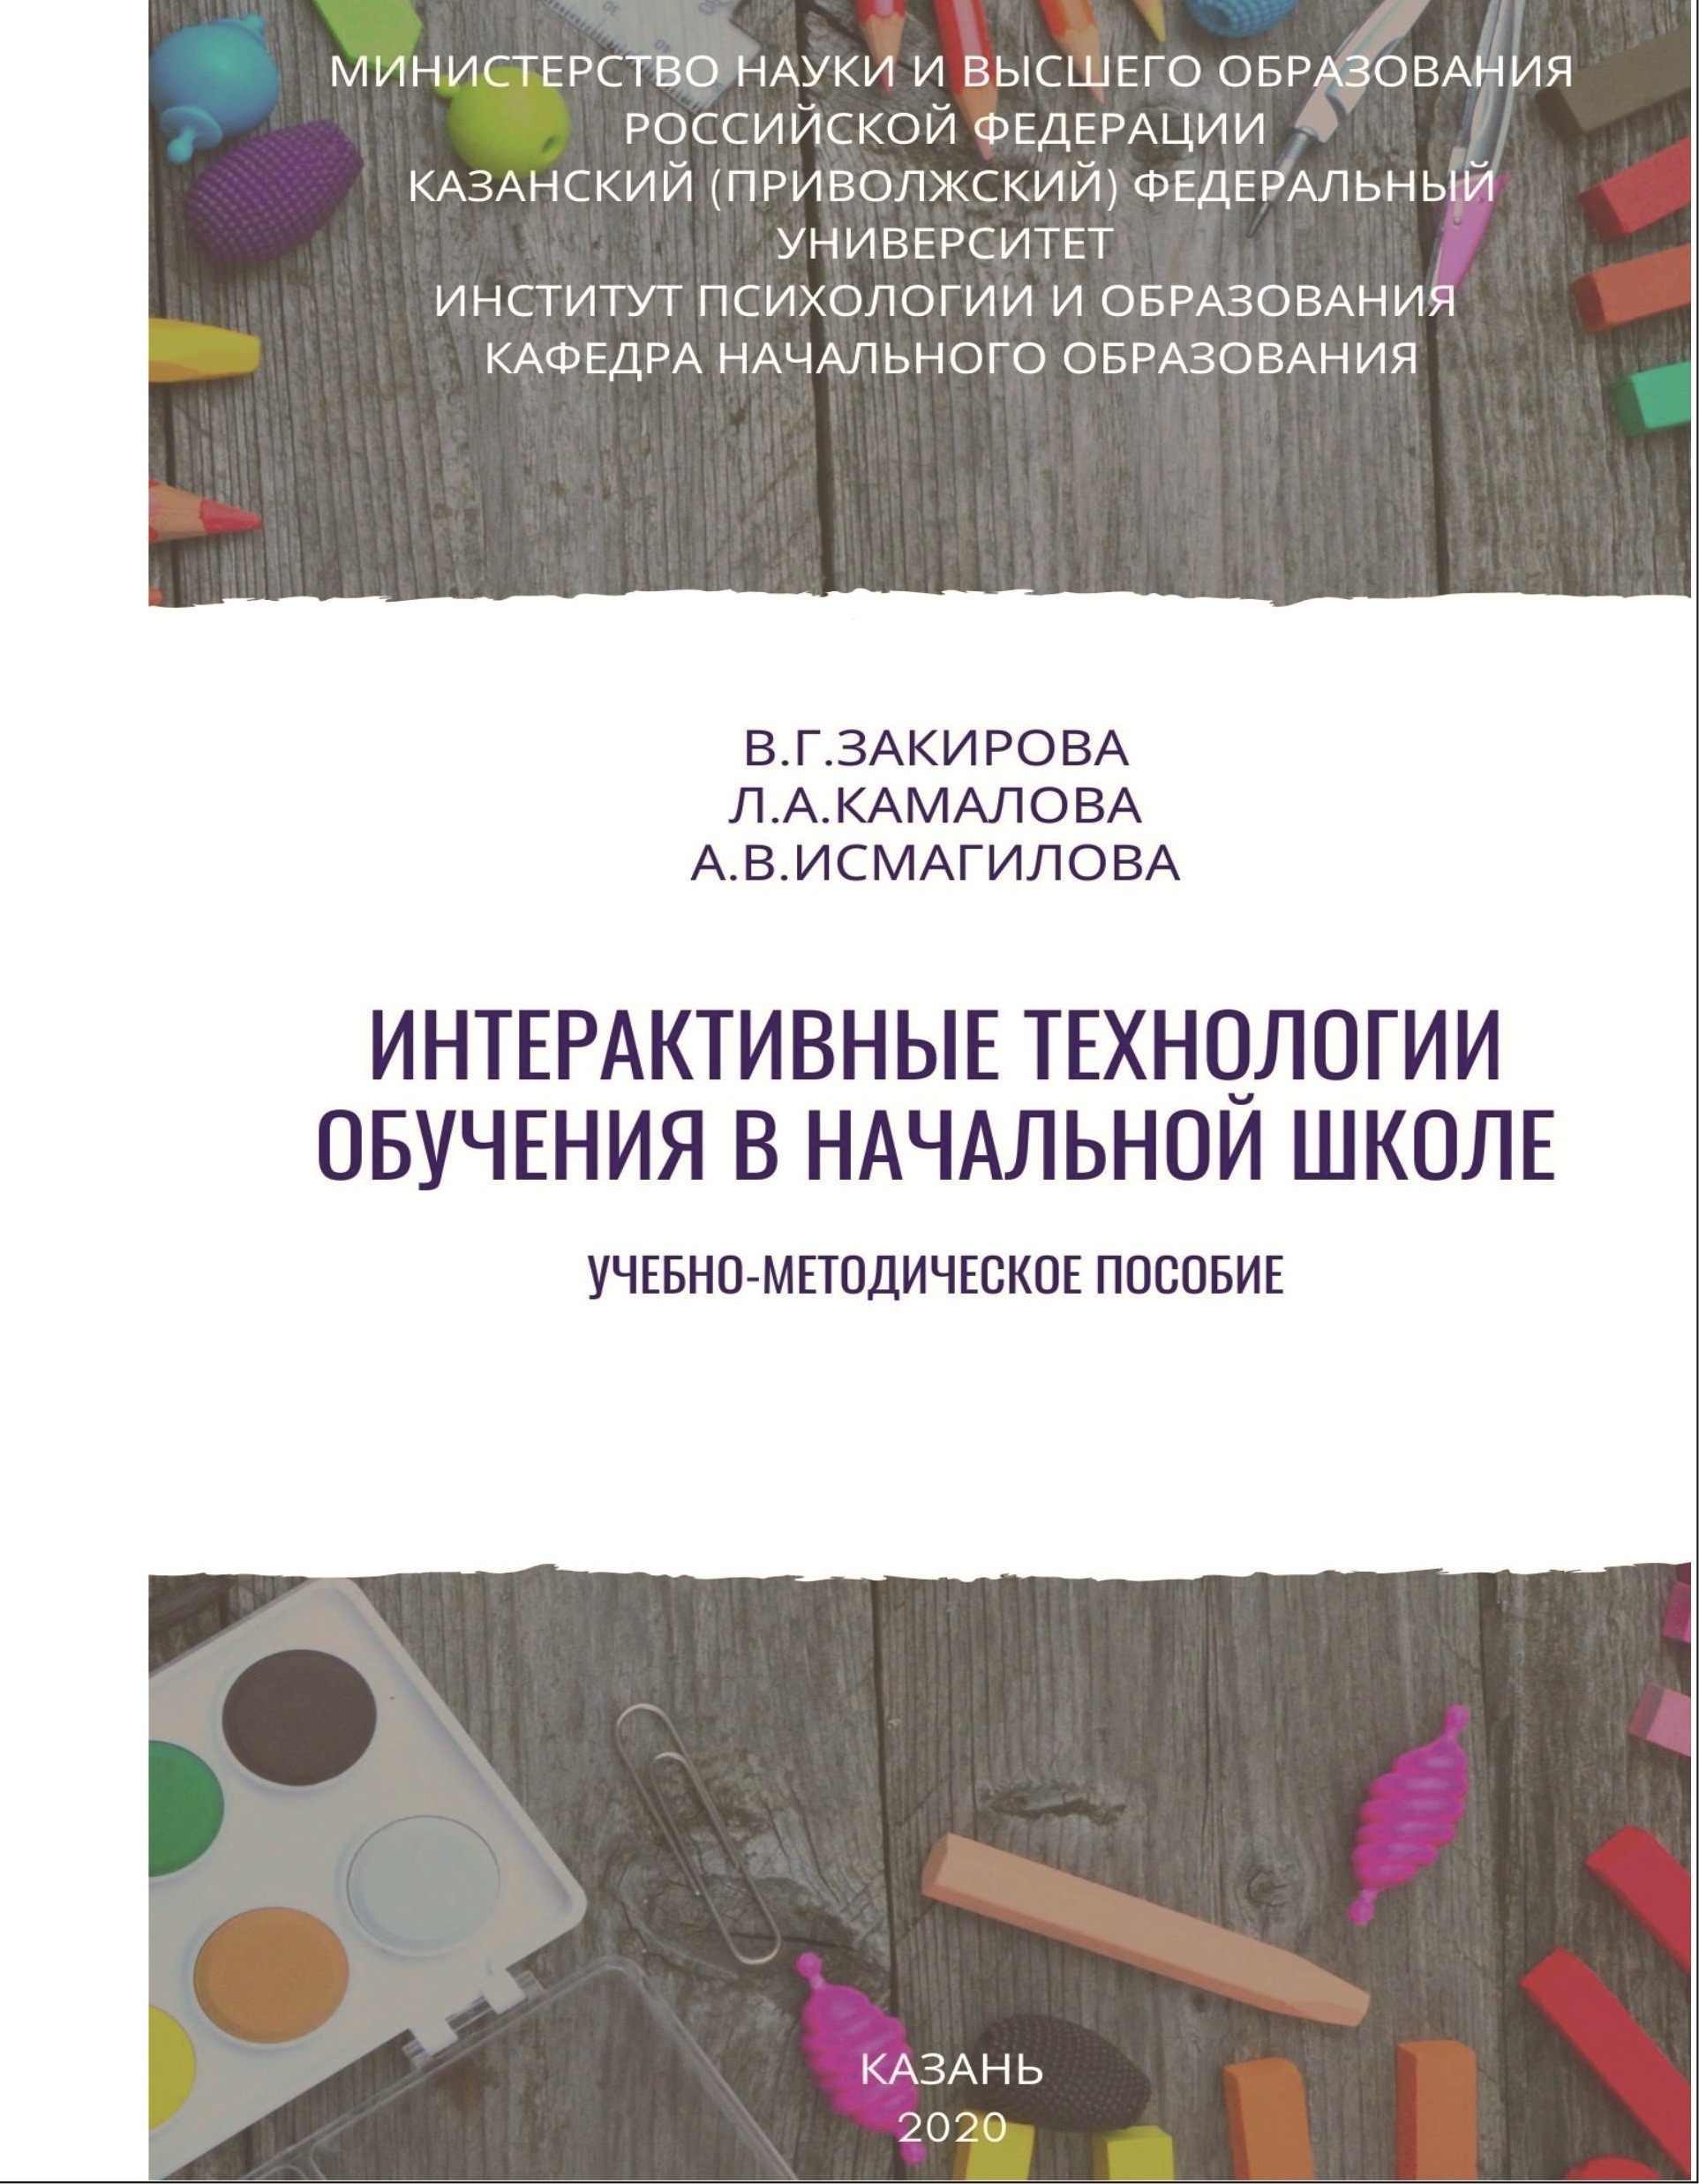 Educators from Institute of Psychology and Education KFU published textbooks on interactive technologies ,Educators from Institute of Psychology and Education KFU published textbooks on interactive technologies